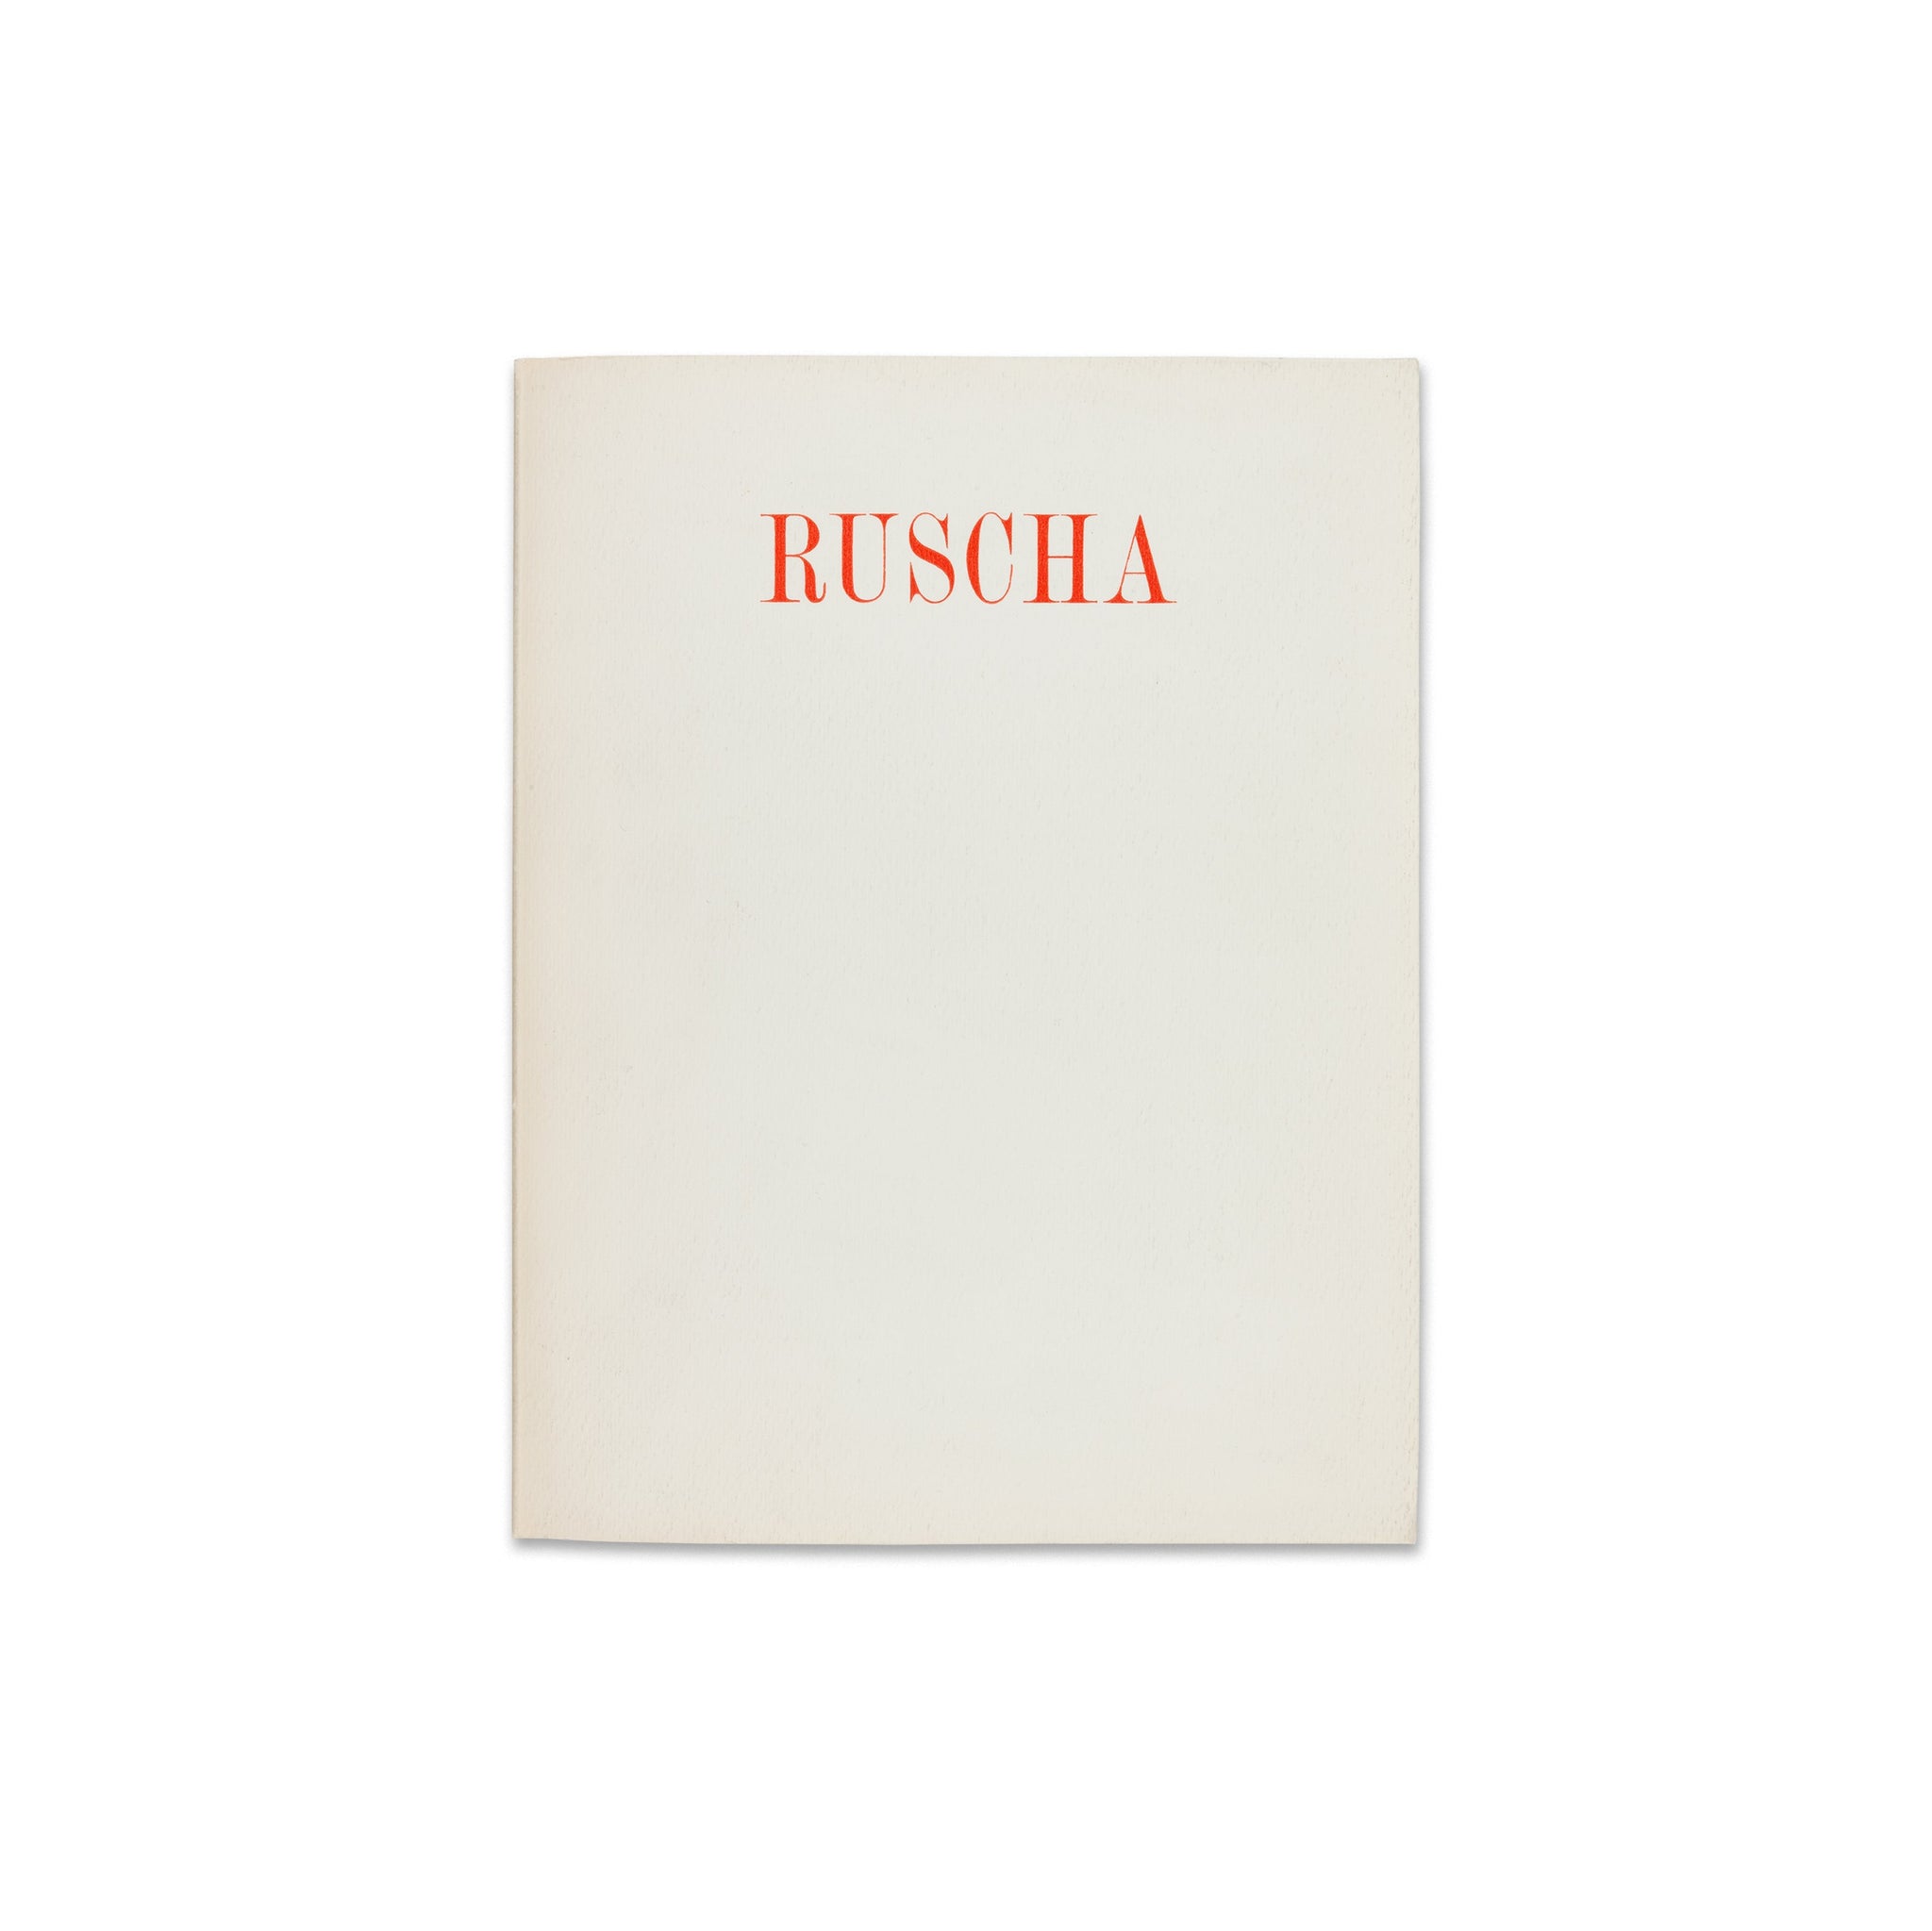 Front cover of Edward Ruscha 1970 rare book published by Galerie Alexandre Iola